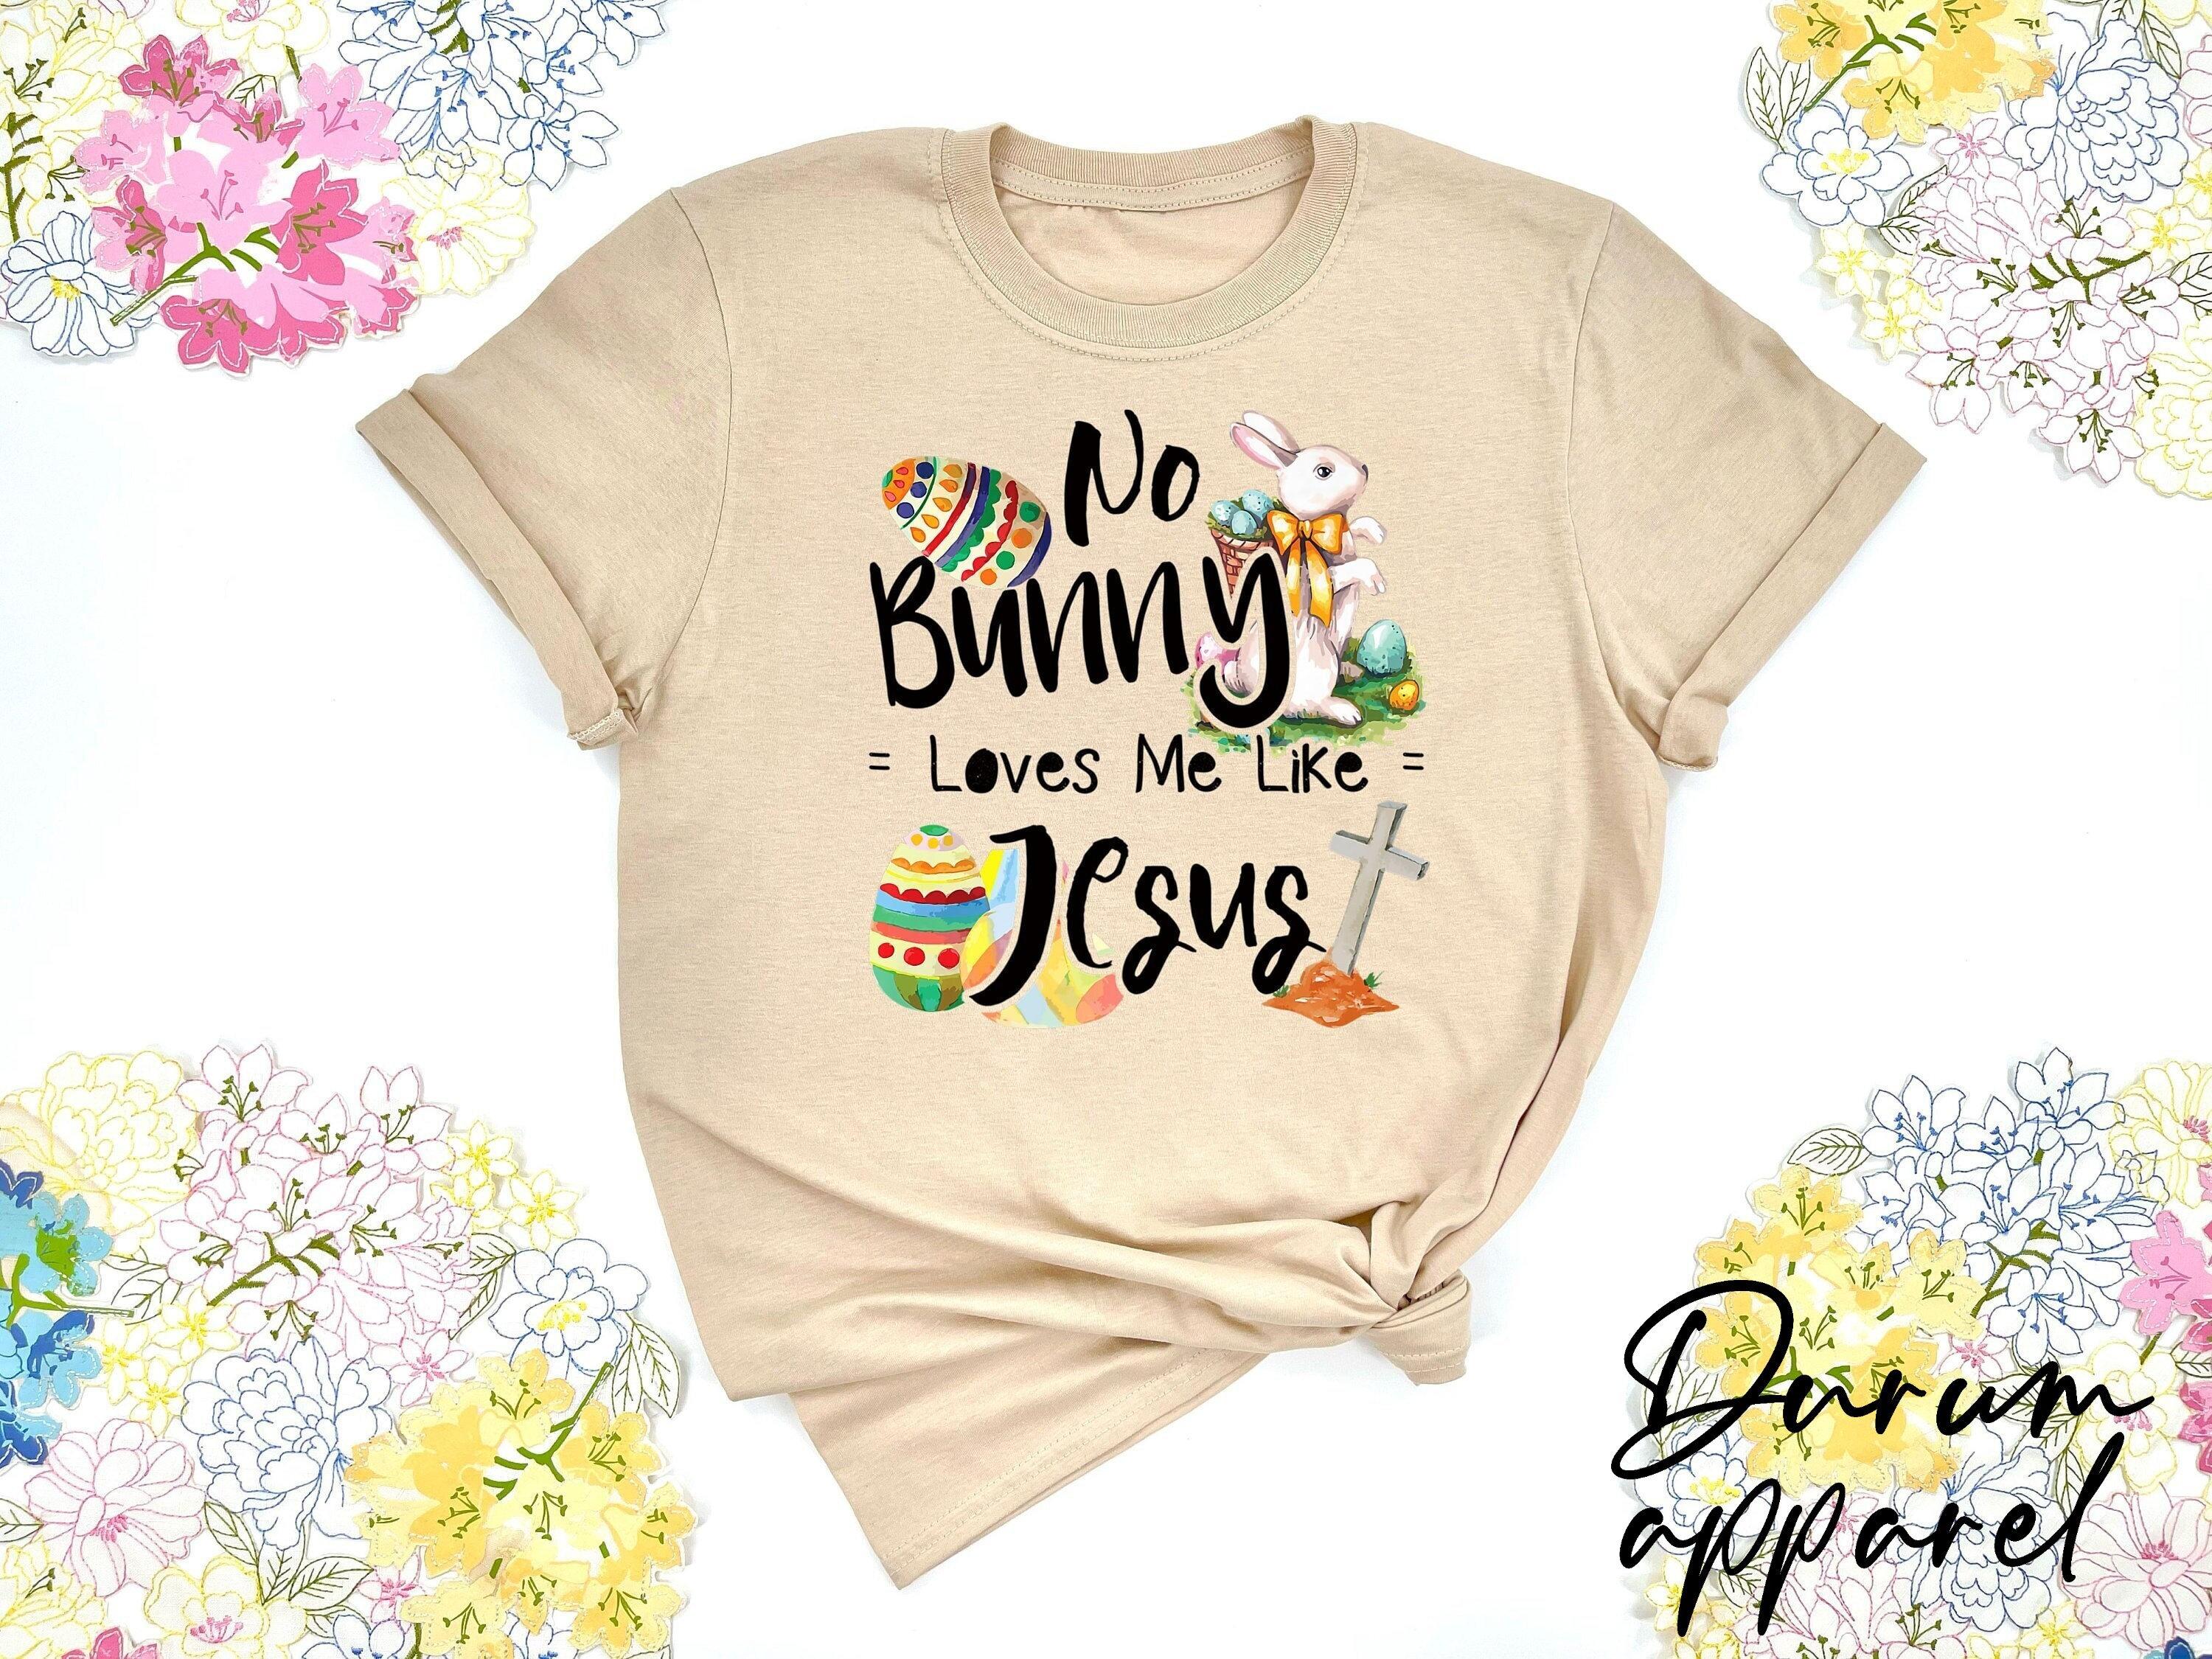 no bunny loves me like jesus shirt women easter shirt christian outfit 4293 1rdkn